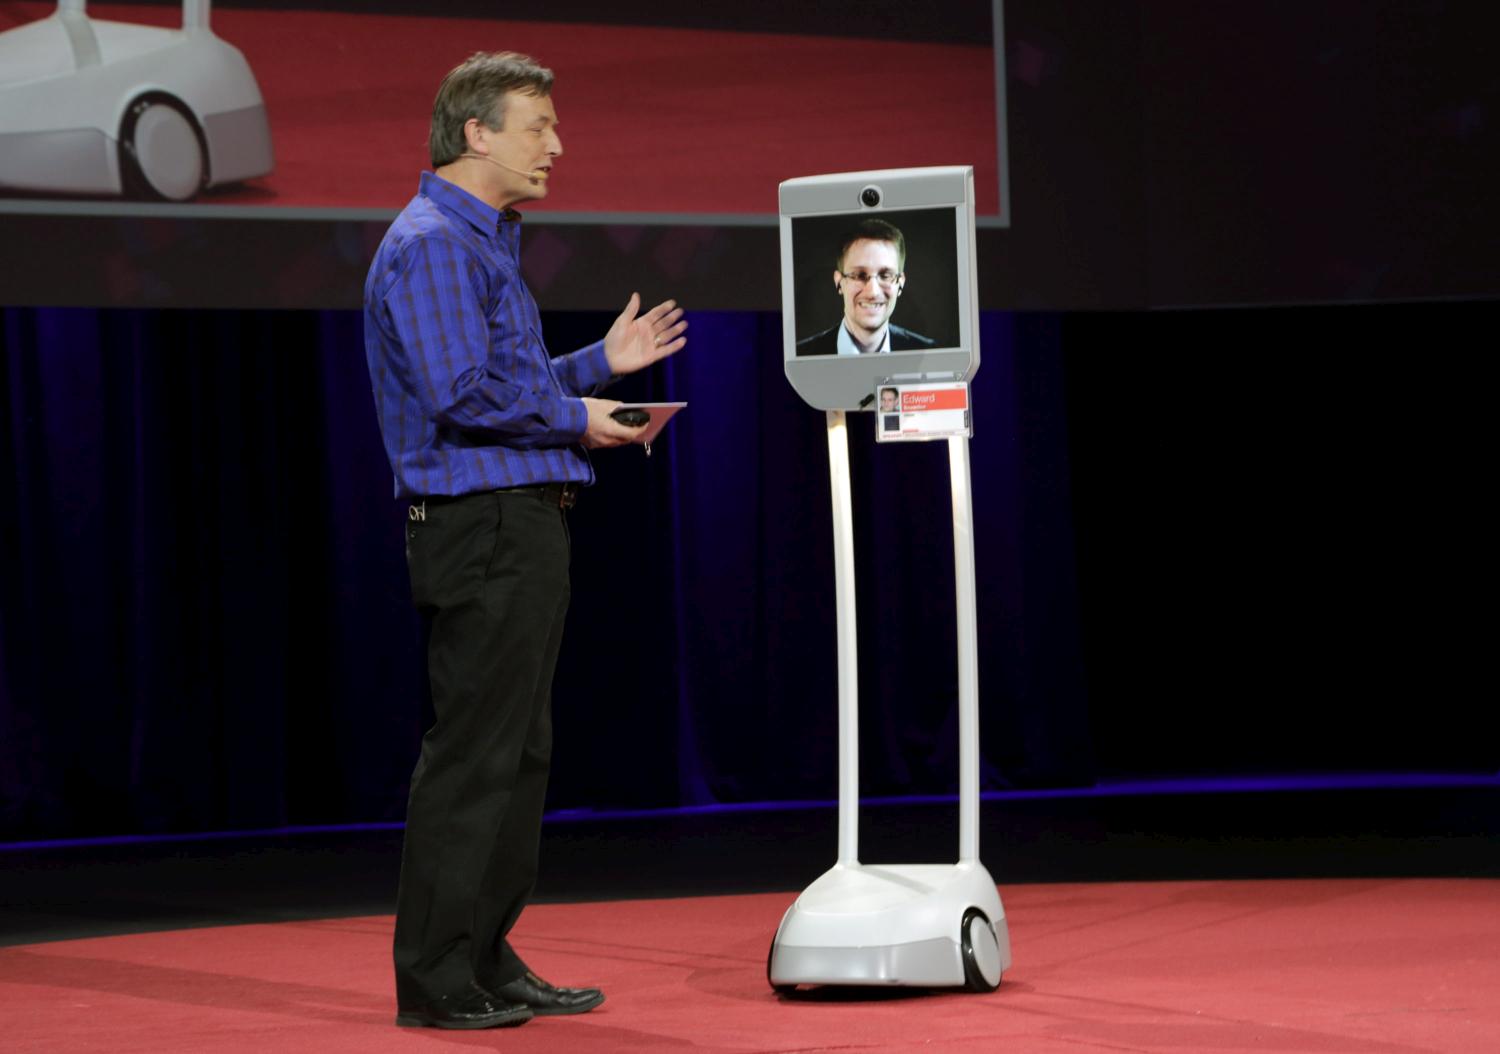 Edward Snowden is interviewed by TED Curator Chris Anderson (L) via a BEAM remote presence system during the 2014 TED conference March 18, 2014 in Vancouver, Canada. (Steven Rosenbaum / Getty Images)